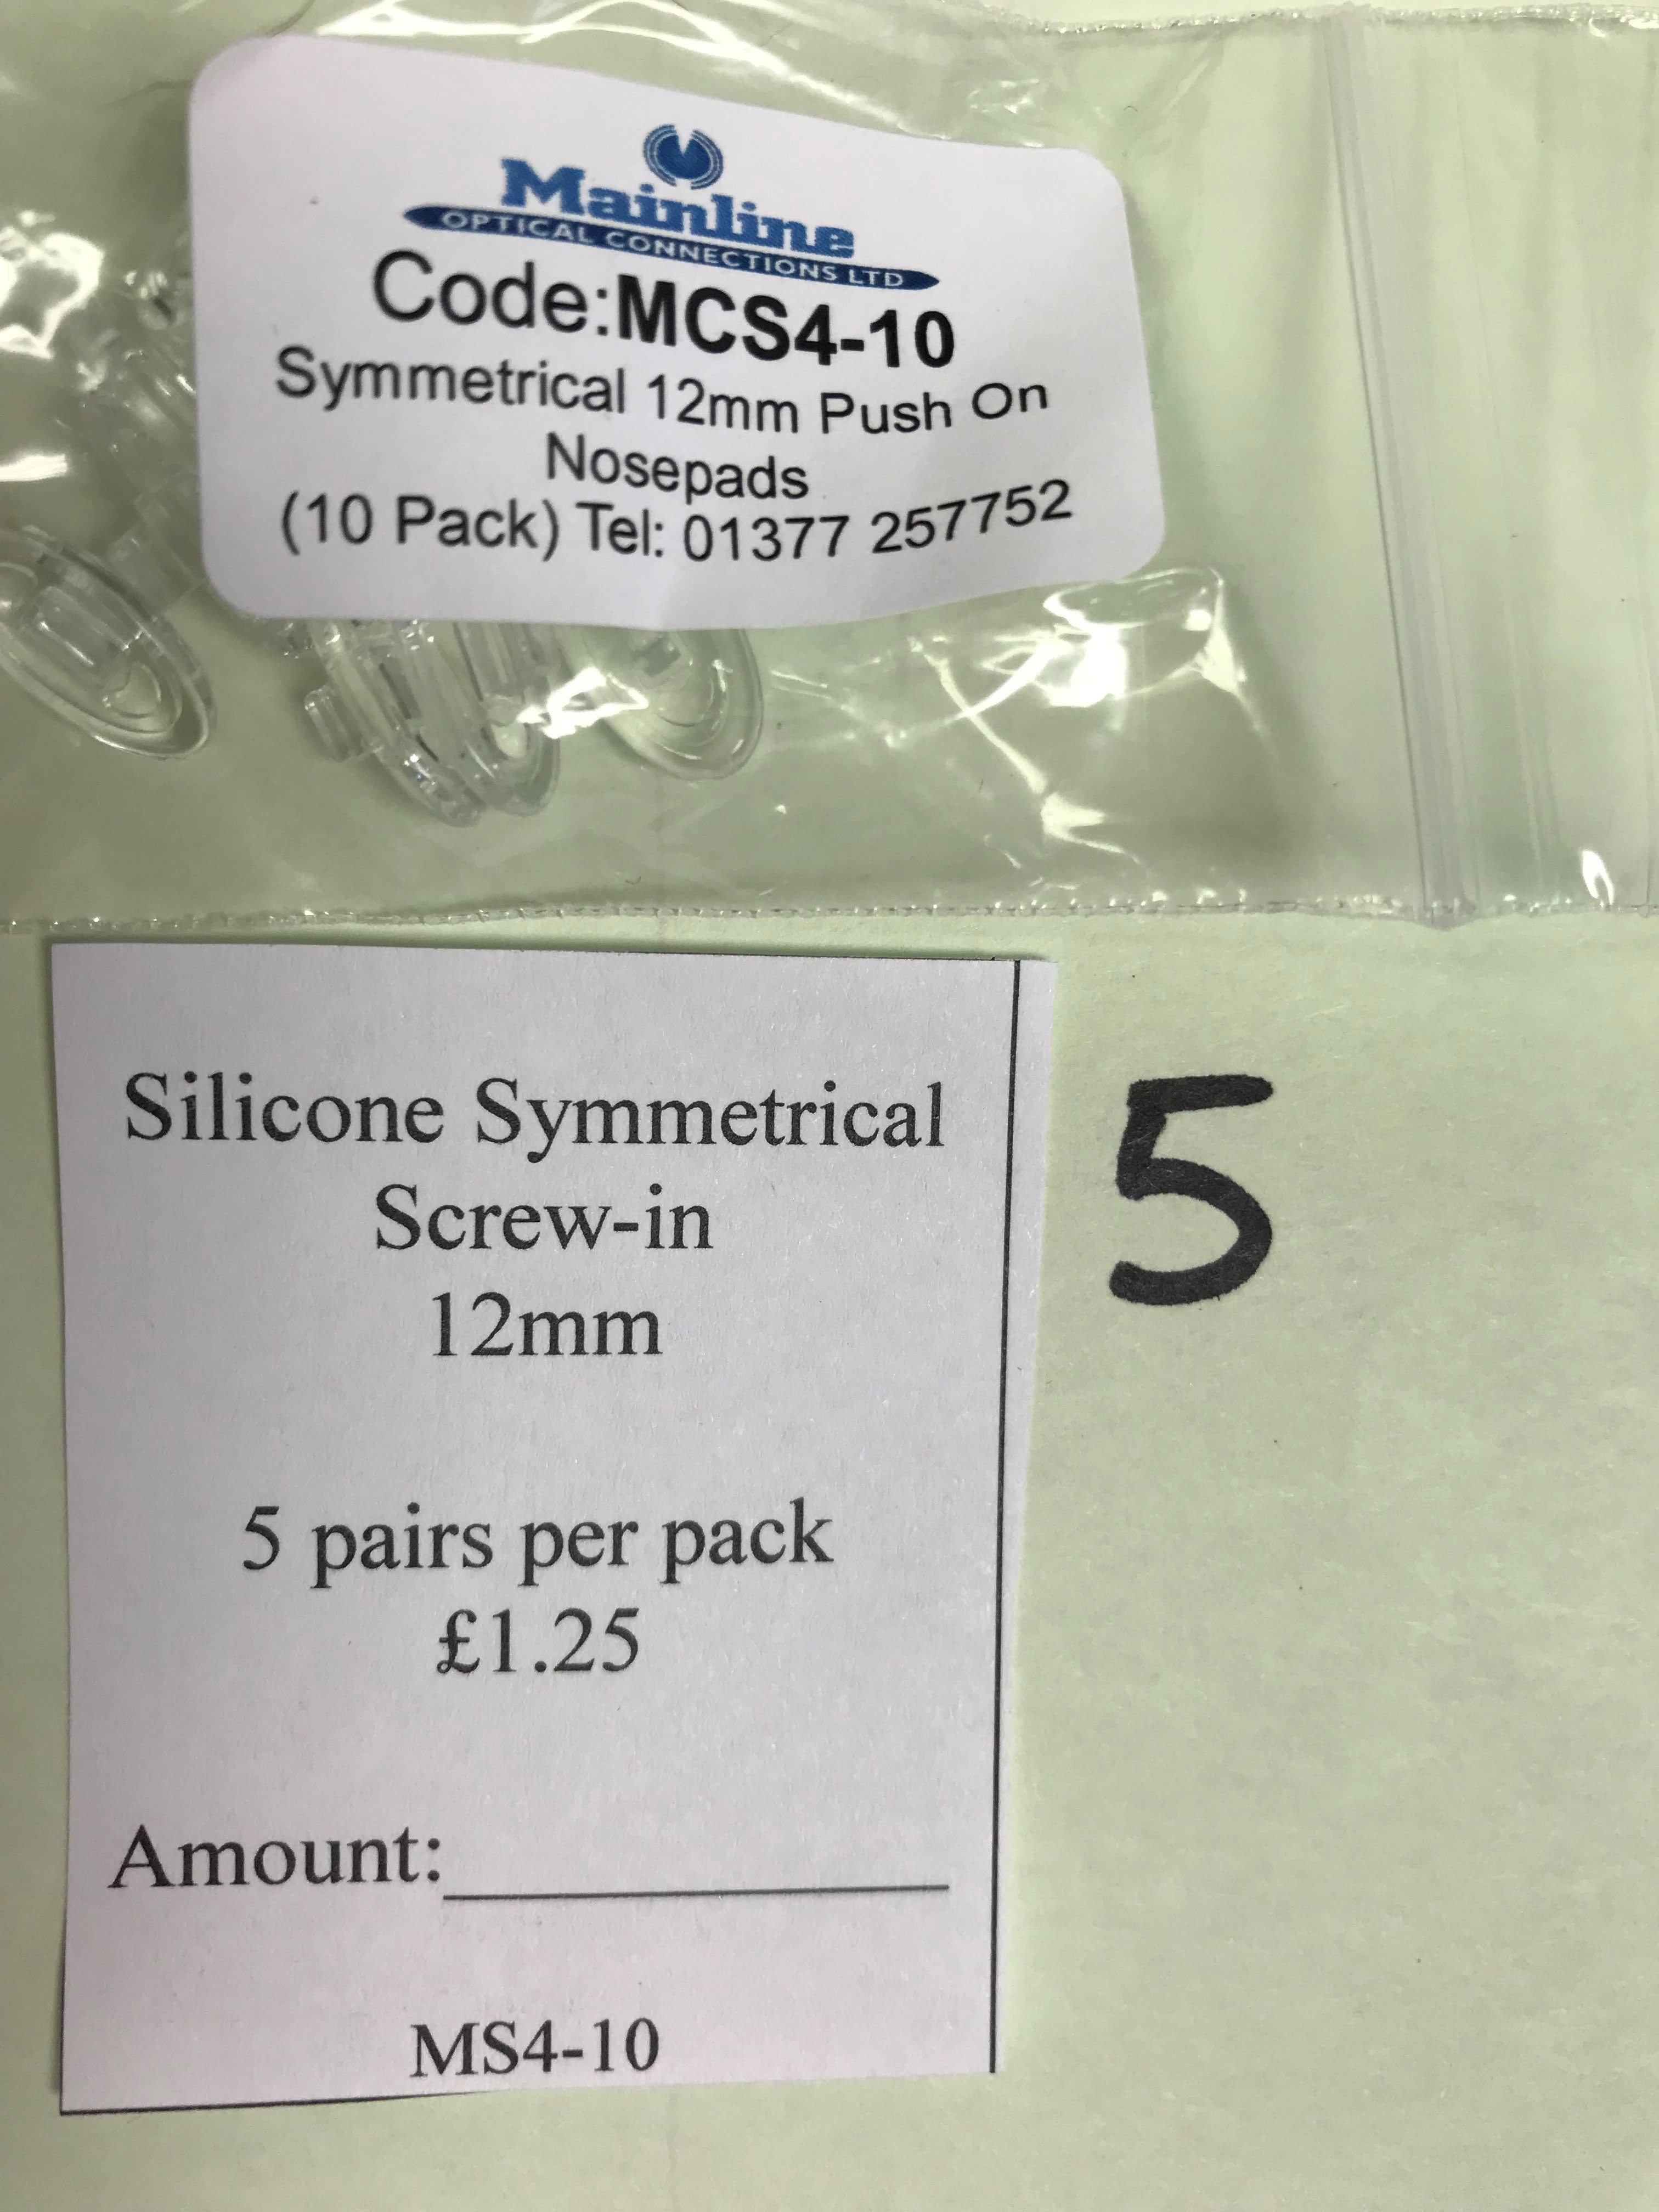 SILICONE SYM SCREW IN PADS 12mm No. 5